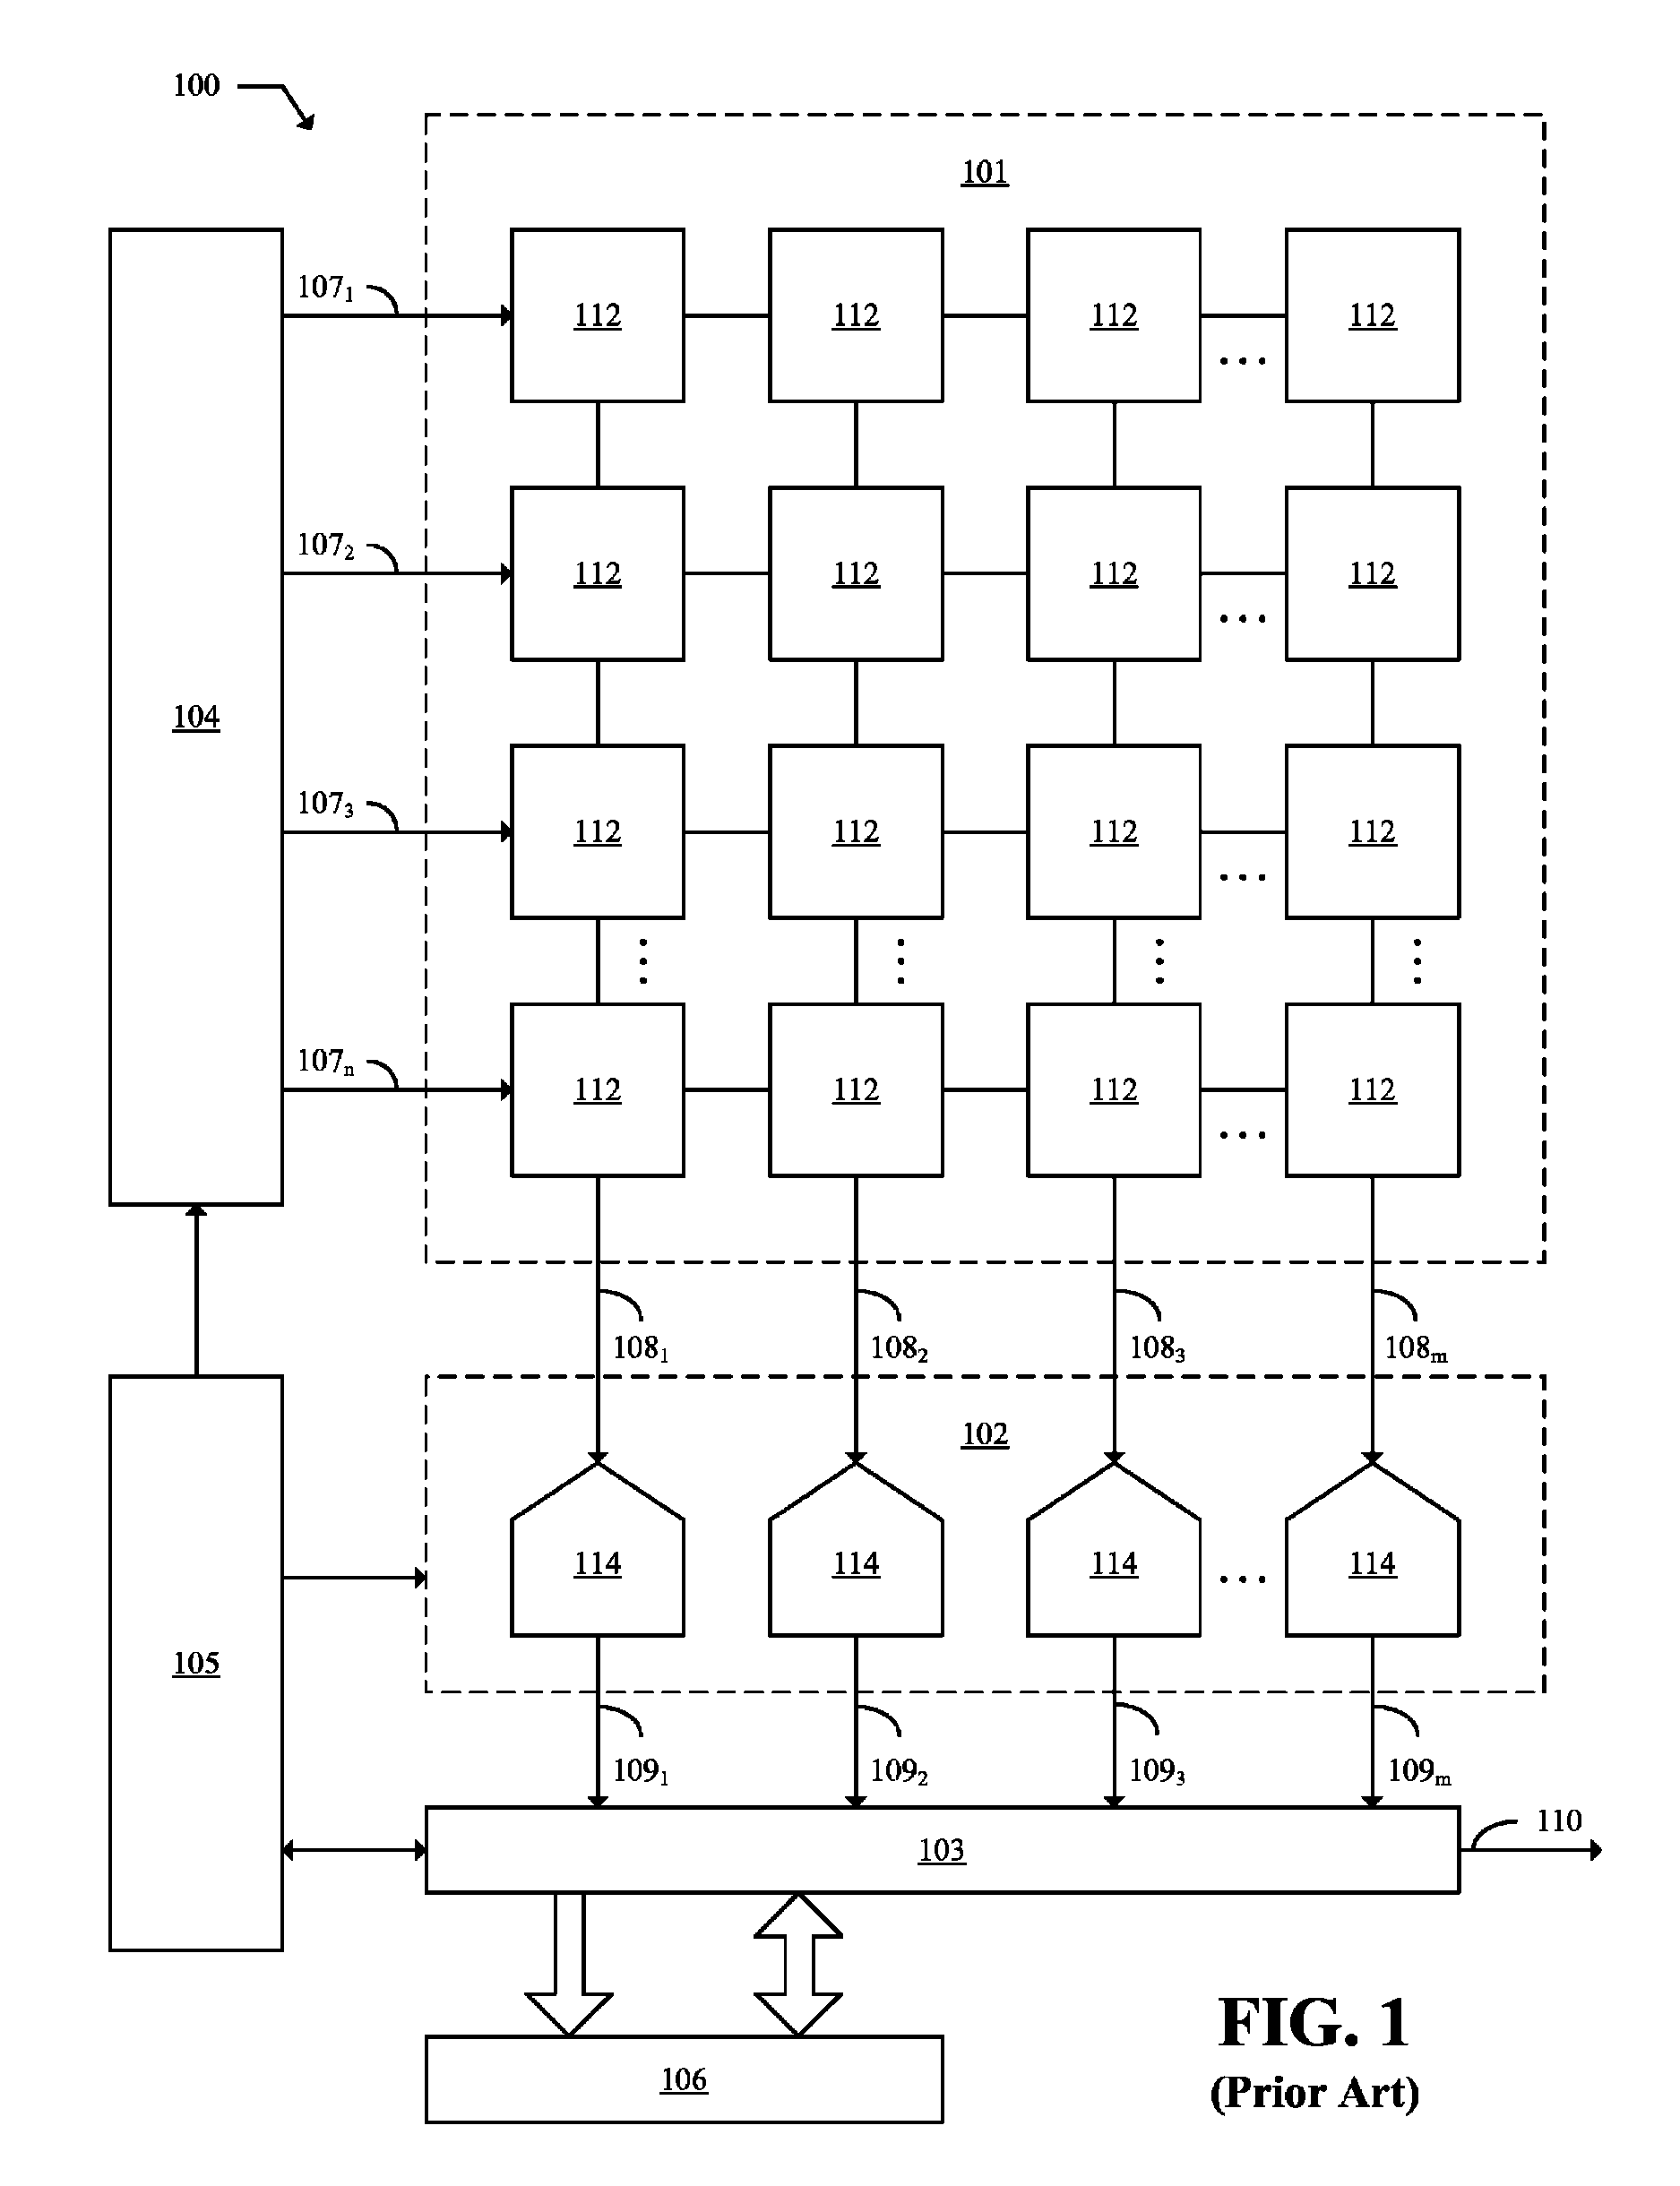 Circuits and methods allowing for pixel array exposure pattern control